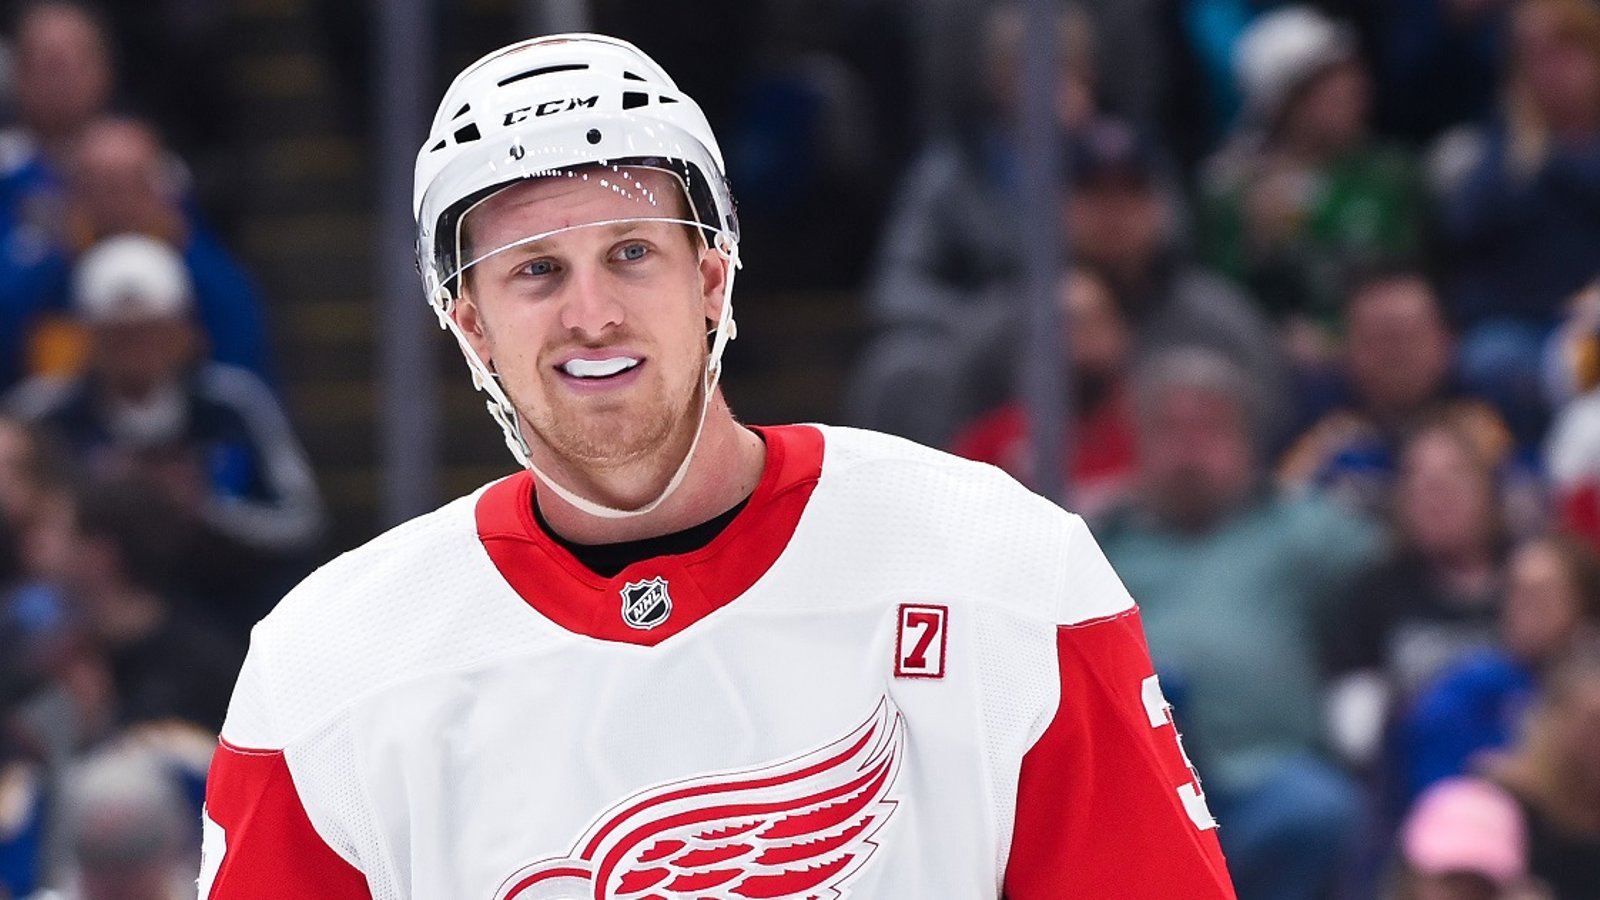 Rumor: An offer sheet with Anthony Mantha's name on it?